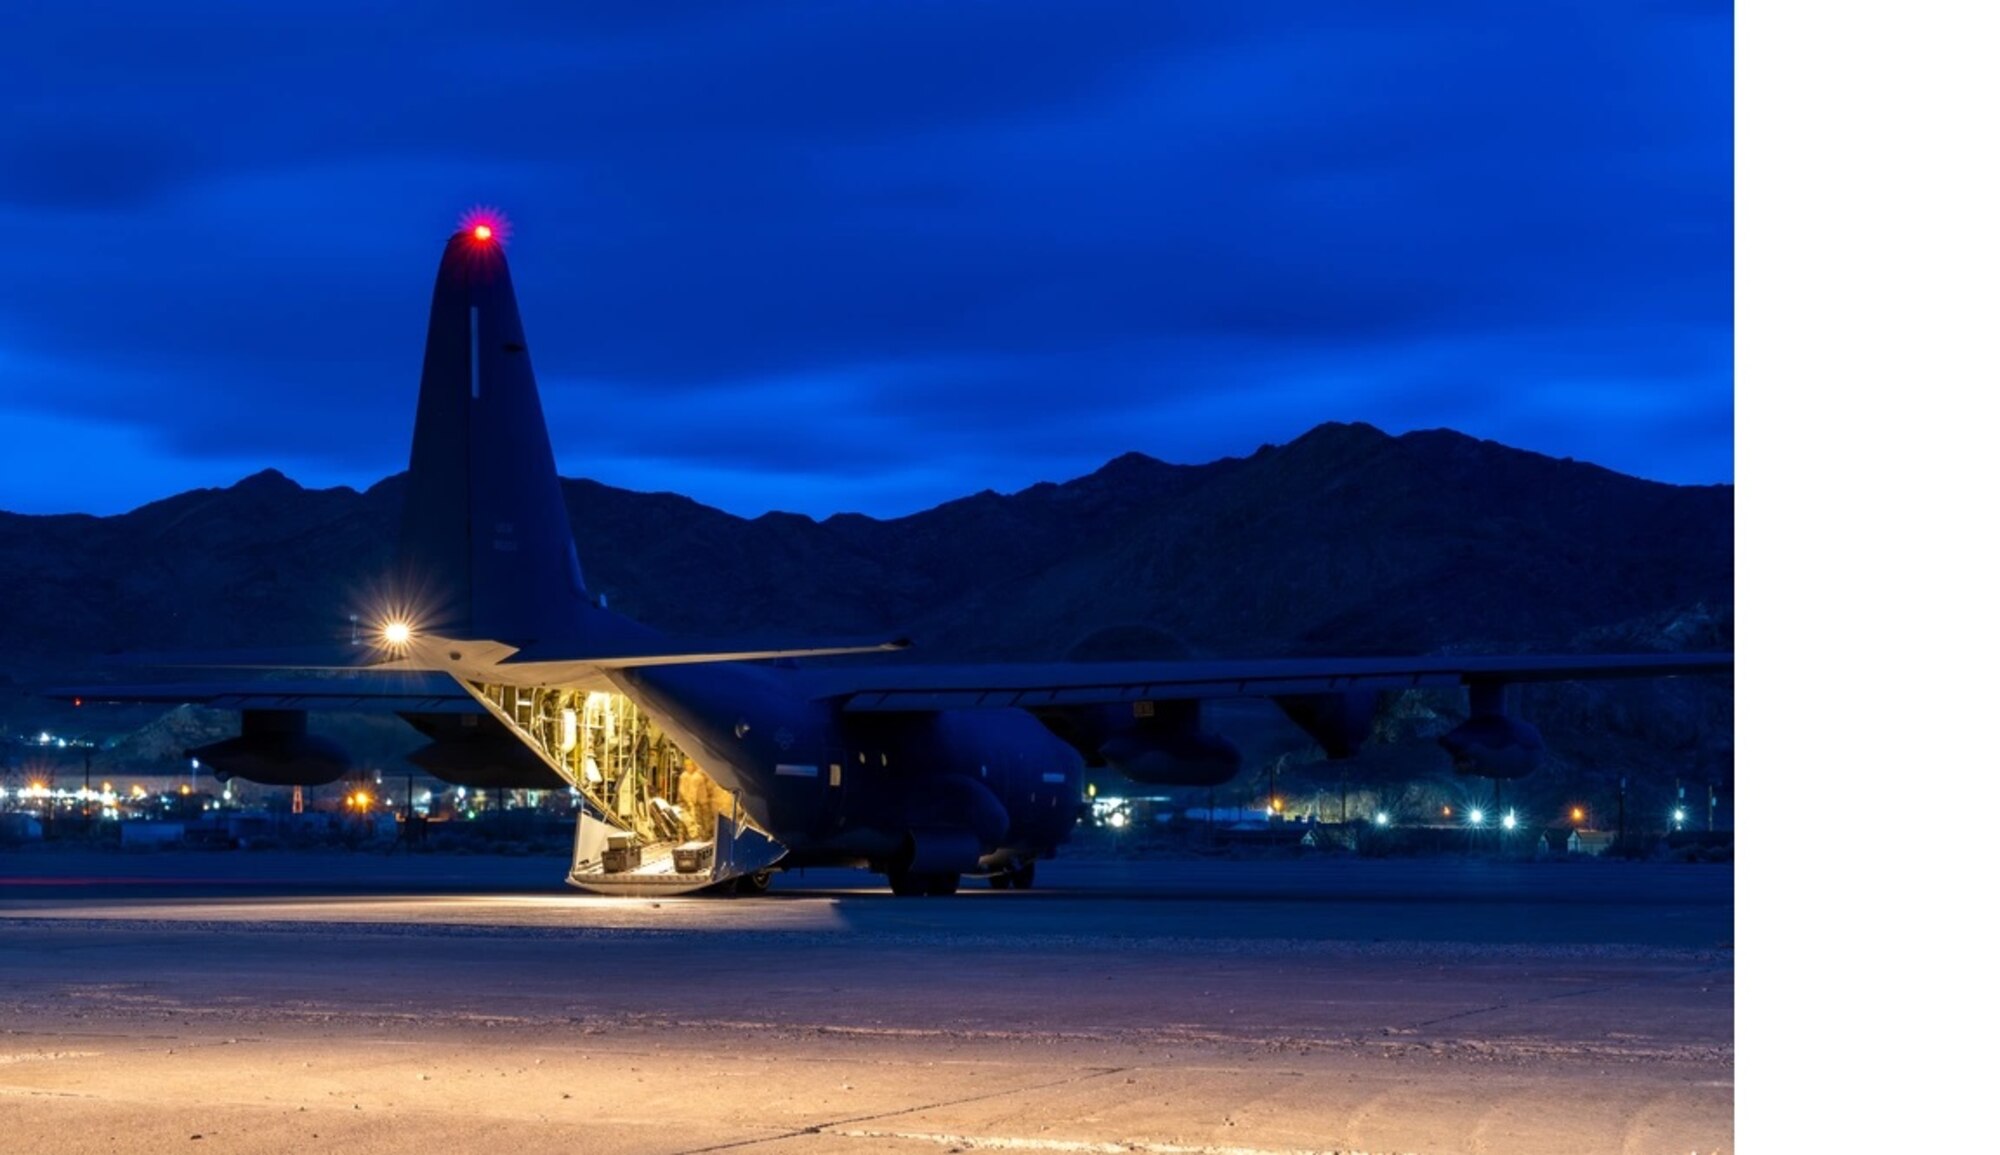 An MC-130J Commando II assigned to the 9th Special Operations Squadron sits on the flightline after unloading personnel and cargo during exercise Emerald Warrior 24 at Wendover Airport, Utah, March 5, 2024. Agile Combat Employment concepts employed by Air Force Special Operations Command such as Mission Sustainment Teams provide the placement, access and survivability needed within contested and denied environments. (U.S. Air Force photo by Senior Airman Keegan Putman)